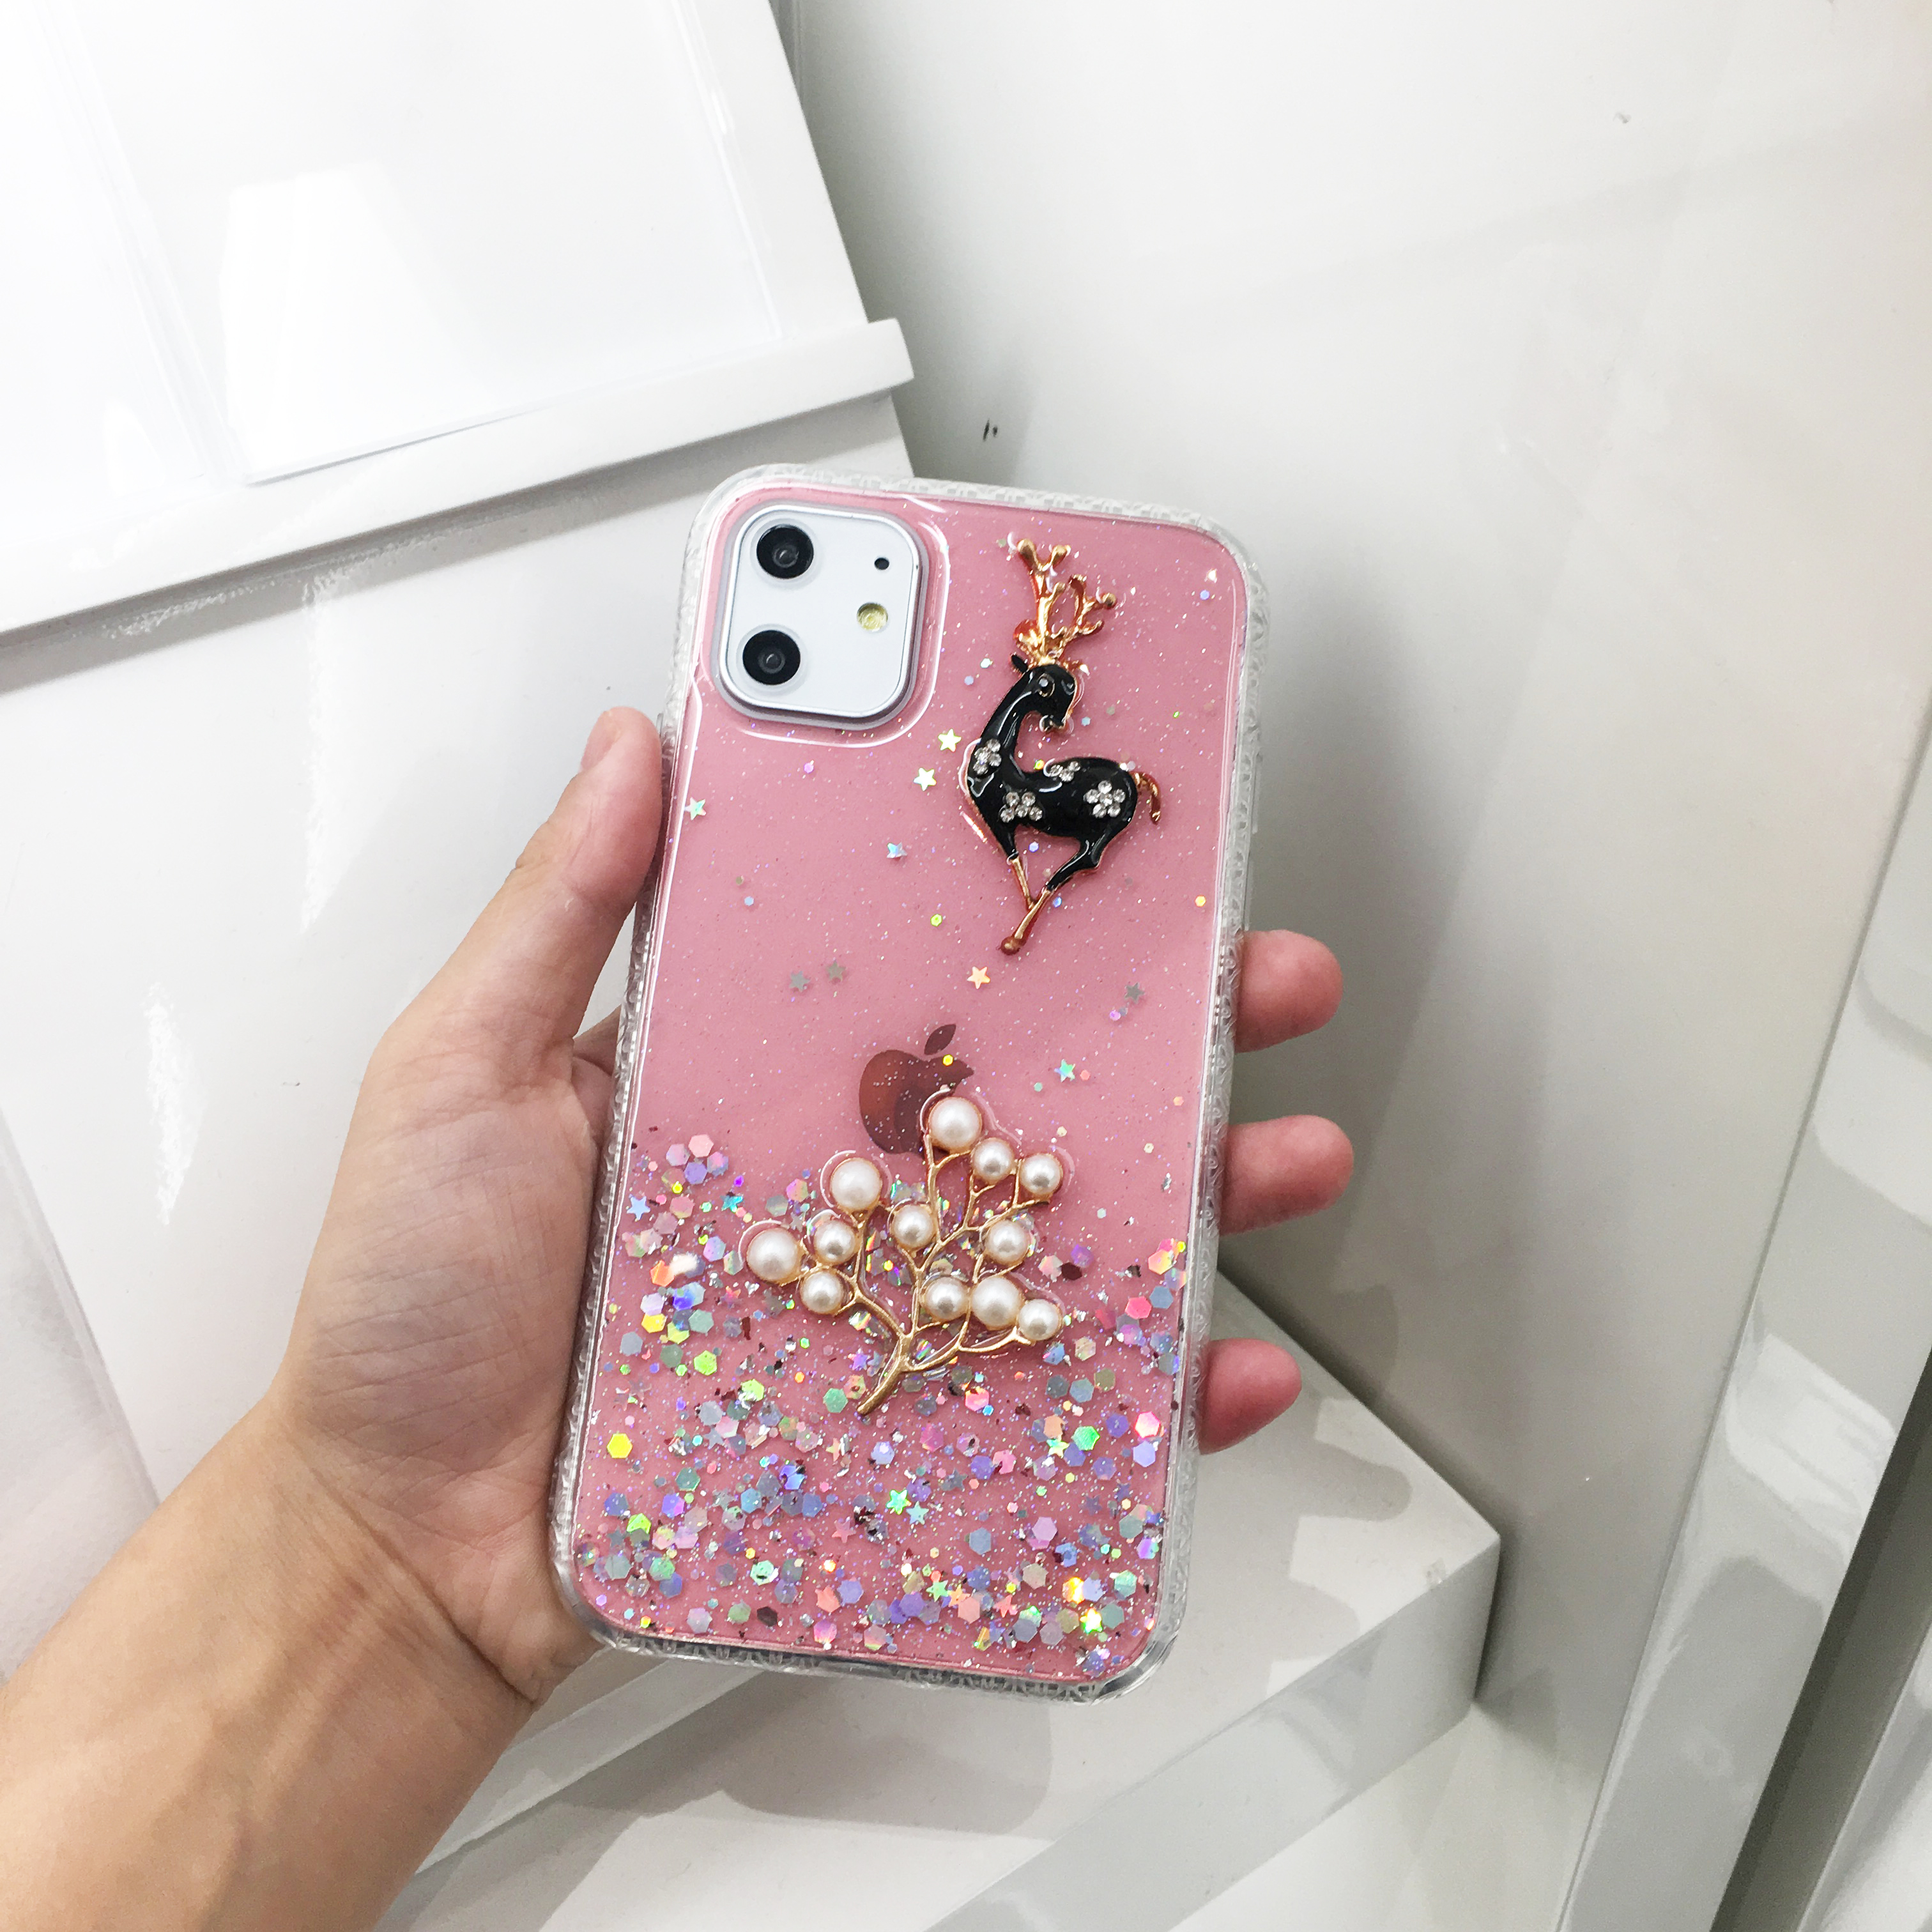 iPHONE 11 Pro (5.8in) 3D Deer Crystal Diamond Shiny Case (Pink)